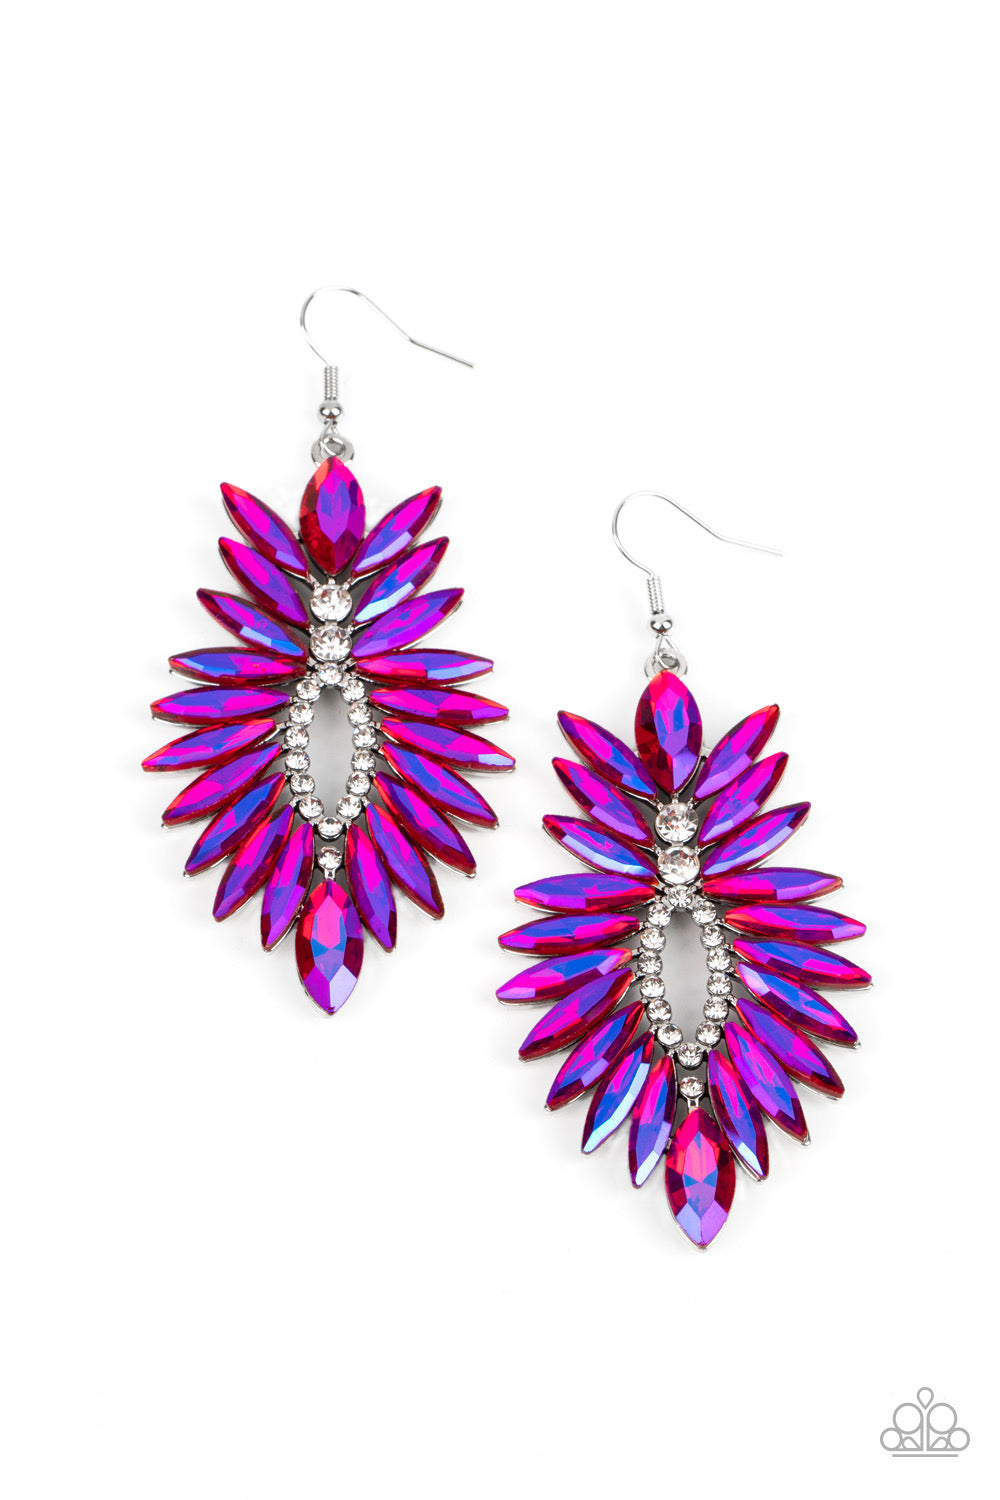 Paparazzi Turn up the Luxe - Pink Earrings - Bling Jewelry Paparazzi Jewelry Images